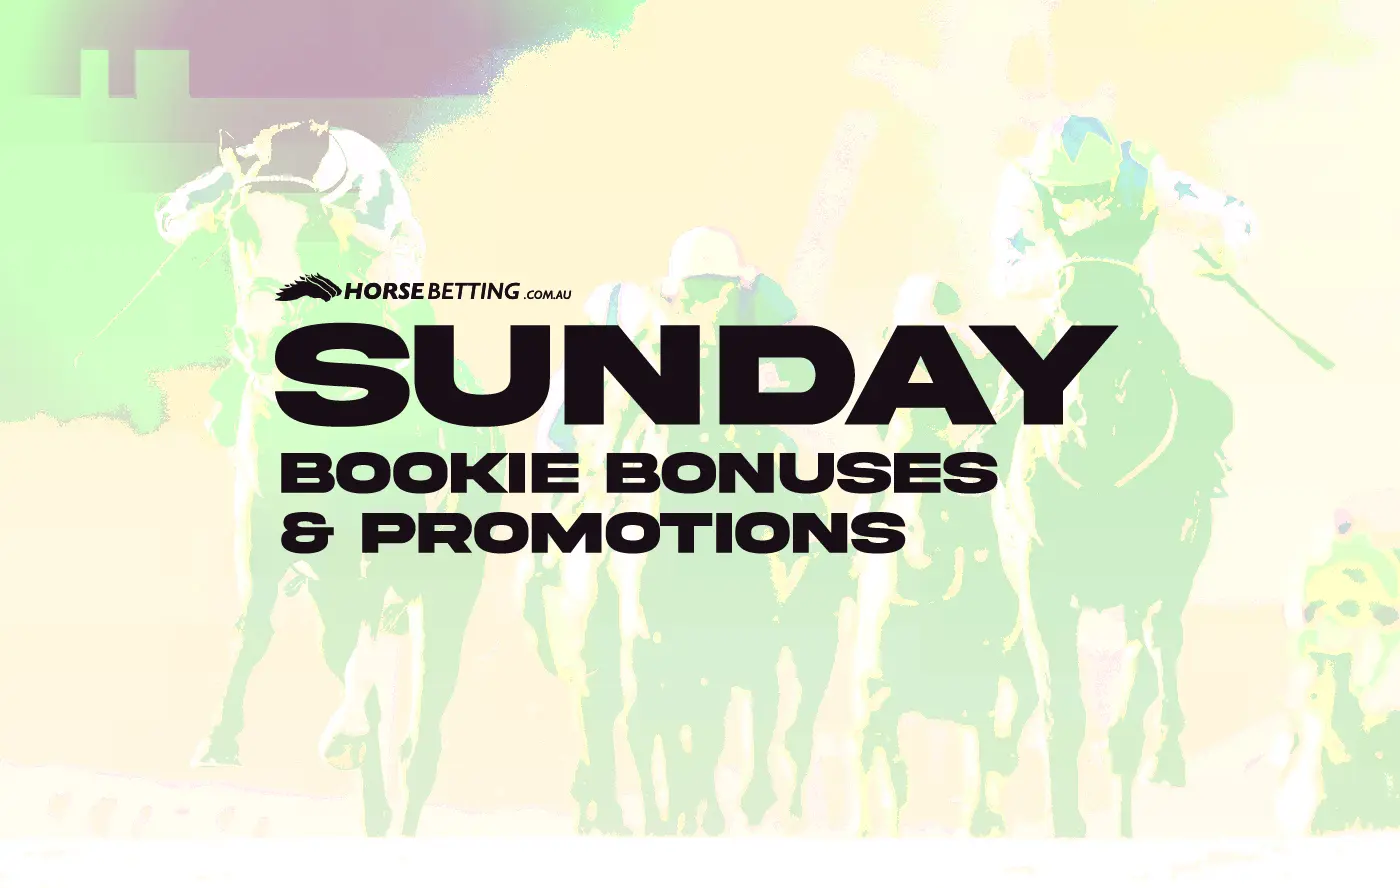 Sunday horse racing promos for May 5